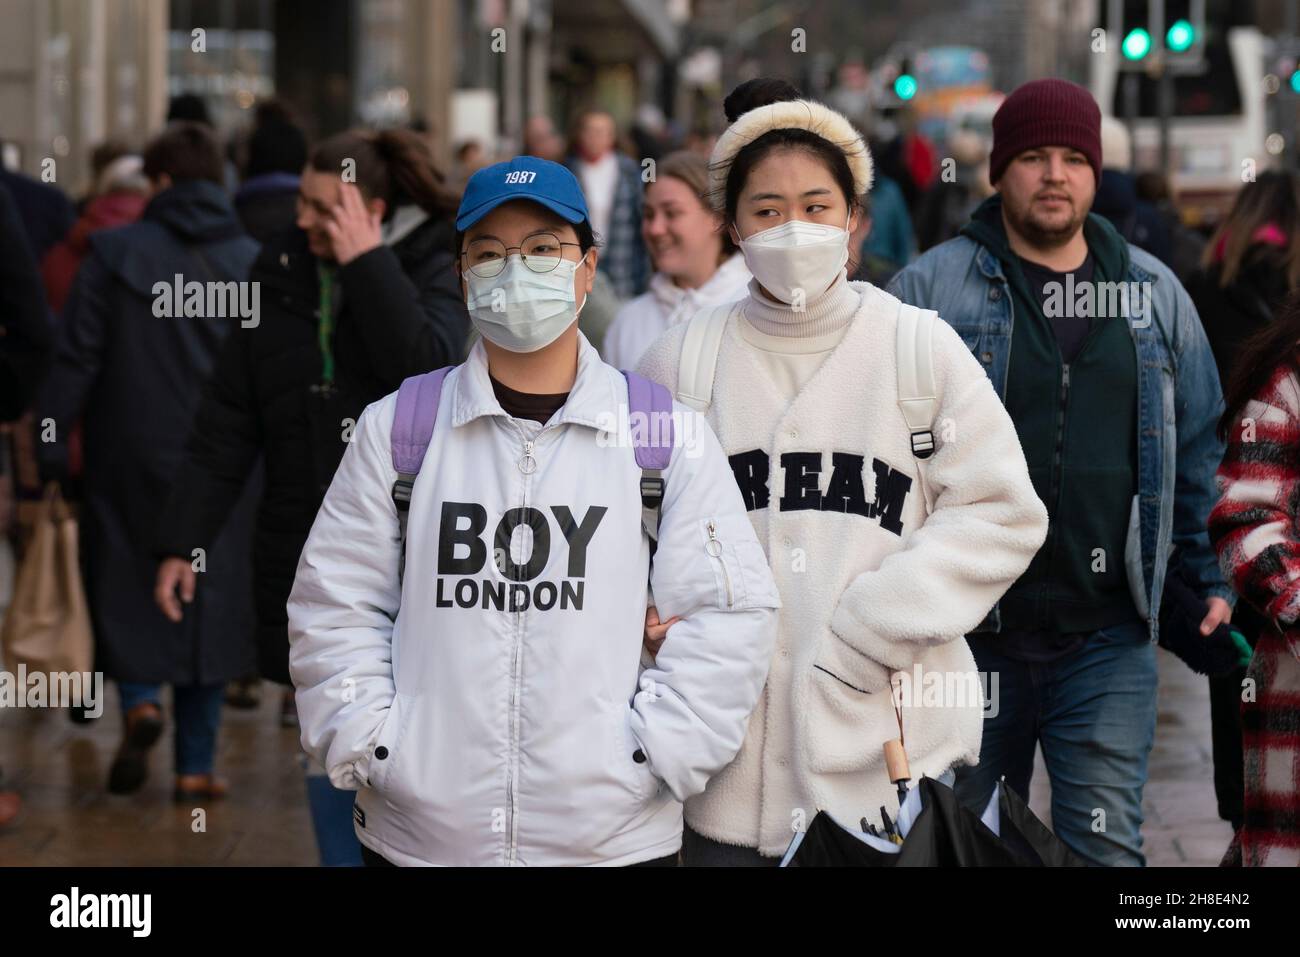 Edinburgh, Scotland, UK. 29th November  2021. Many members of the public wearing face masks outdoor on Princes Street in Edinburgh. With the new Omicron variant of Coronavirus now in Scotland the public have been urged to wear face masks as much as possible to minimise spread of the new virus  variant. Iain Masterton/Alamy Live News. Stock Photo